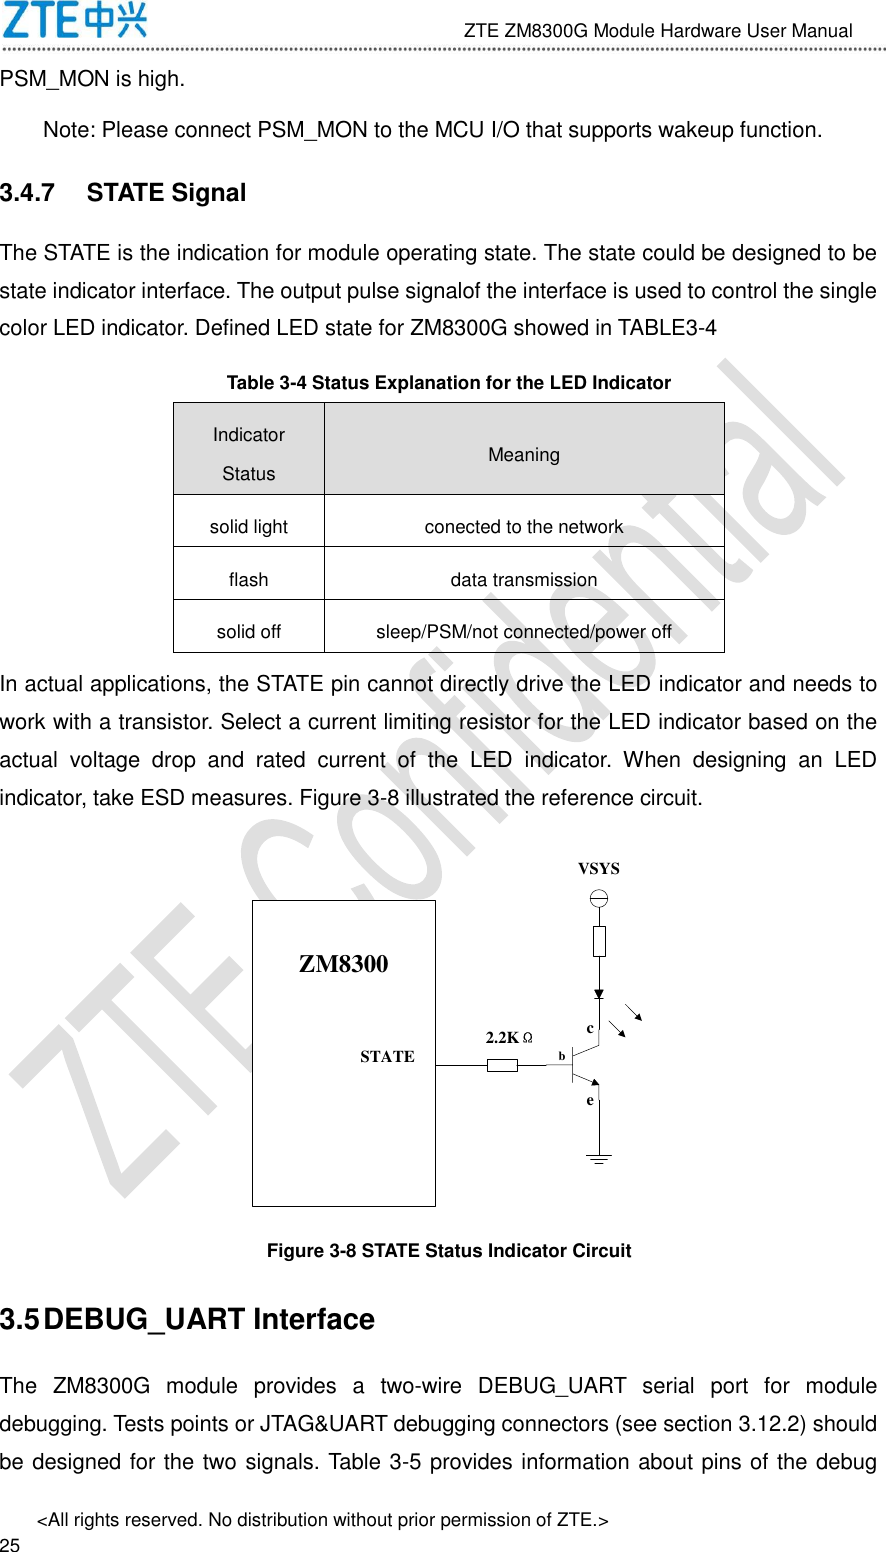                              ZTE ZM8300G Module Hardware User Manual &lt;All rights reserved. No distribution without prior permission of ZTE.&gt;                                                               25 PSM_MON is high.   Note: Please connect PSM_MON to the MCU I/O that supports wakeup function.   3.4.7  STATE Signal The STATE is the indication for module operating state. The state could be designed to be state indicator interface. The output pulse signalof the interface is used to control the single color LED indicator. Defined LED state for ZM8300G showed in TABLE3-4 Table 3-4 Status Explanation for the LED Indicator Indicator Status Meaning solid light conected to the network flash data transmission solid off sleep/PSM/not connected/power off In actual applications, the STATE pin cannot directly drive the LED indicator and needs to work with a transistor. Select a current limiting resistor for the LED indicator based on the actual  voltage  drop  and  rated  current  of  the  LED  indicator.  When  designing  an  LED indicator, take ESD measures. Figure 3-8 illustrated the reference circuit. STATEZM8300STATE 2.2KΩbceVSYS Figure 3-8 STATE Status Indicator Circuit 3.5 DEBUG_UART Interface The  ZM8300G  module  provides  a  two-wire  DEBUG_UART  serial  port  for  module debugging. Tests points or JTAG&amp;UART debugging connectors (see section 3.12.2) should be designed for the two signals. Table 3-5 provides information about pins of the debug 